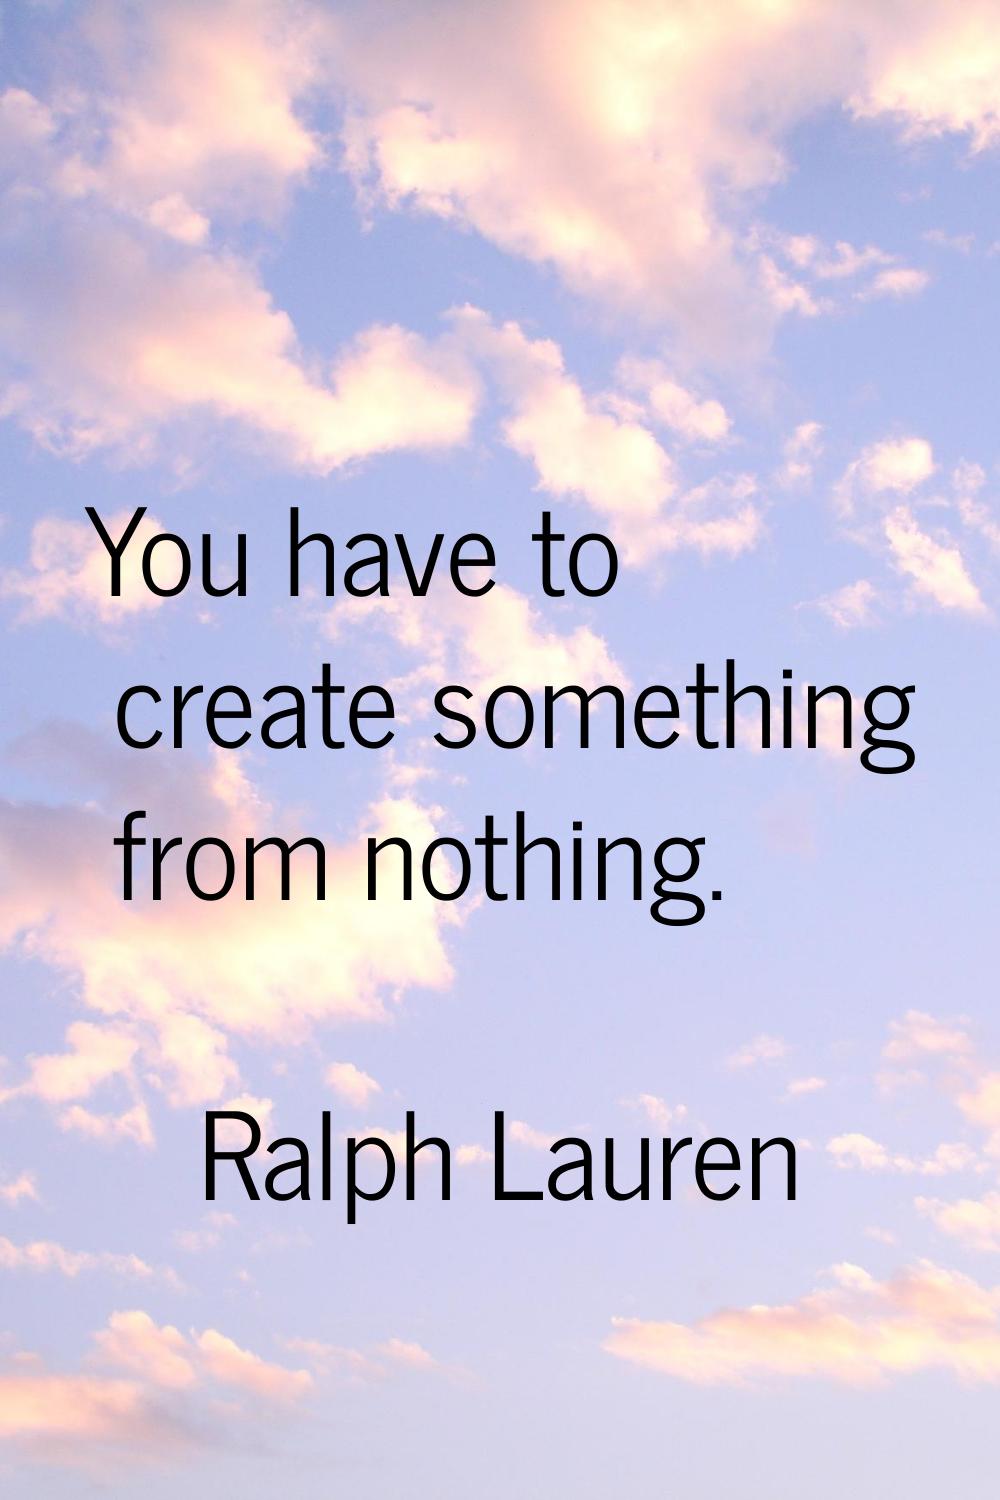 You have to create something from nothing.